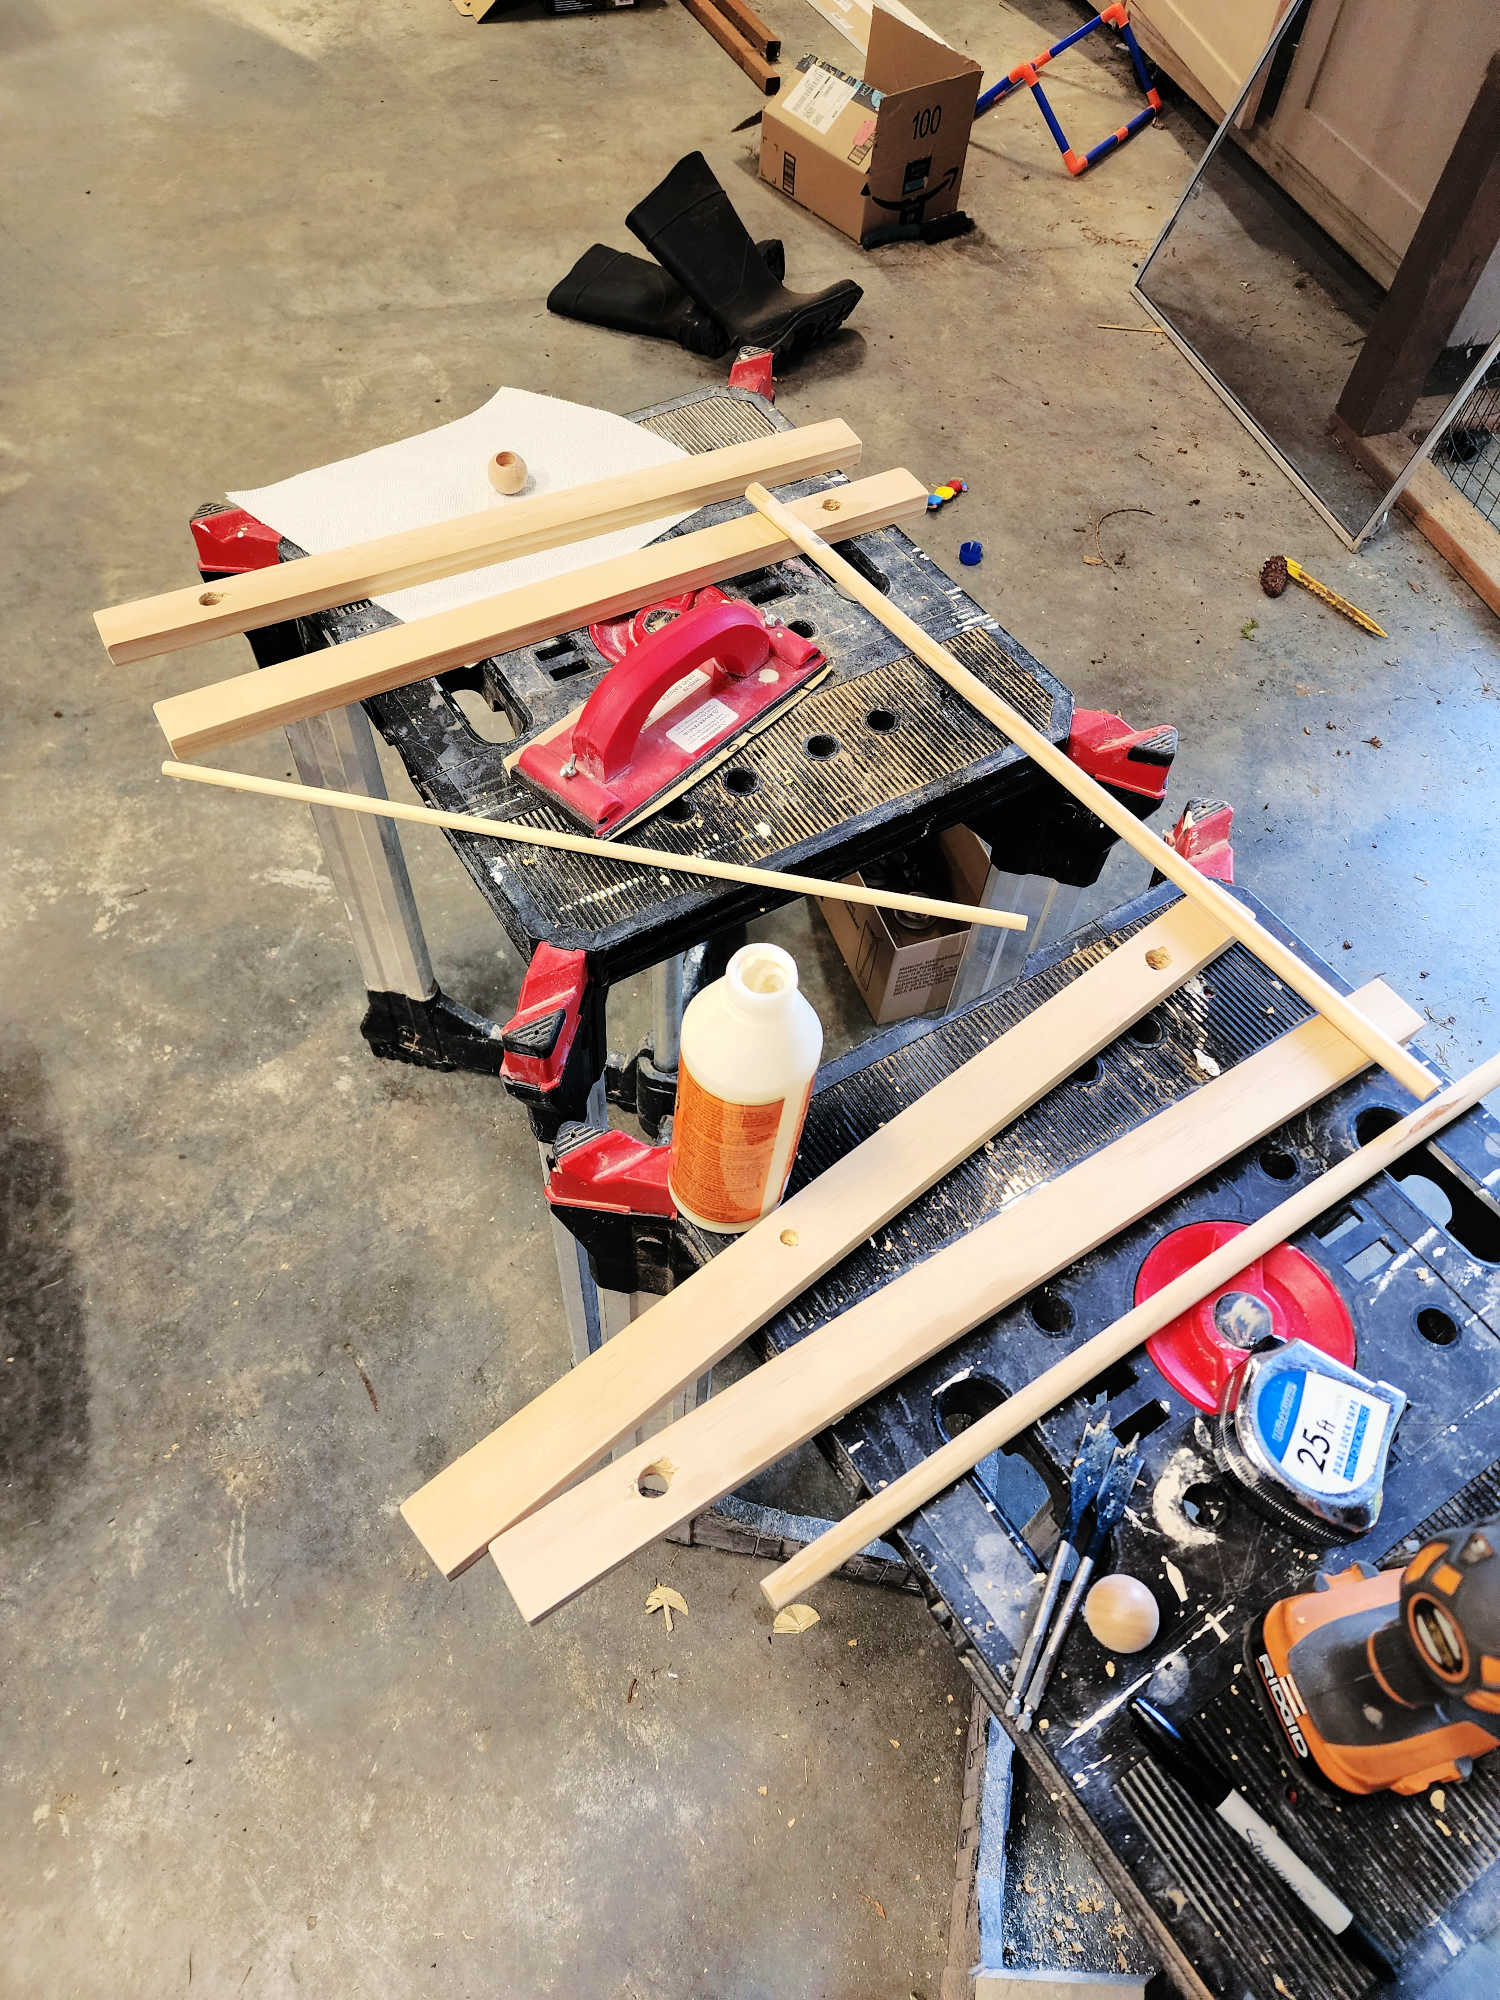 Wood pieces sit on a sawhorse in a workshop